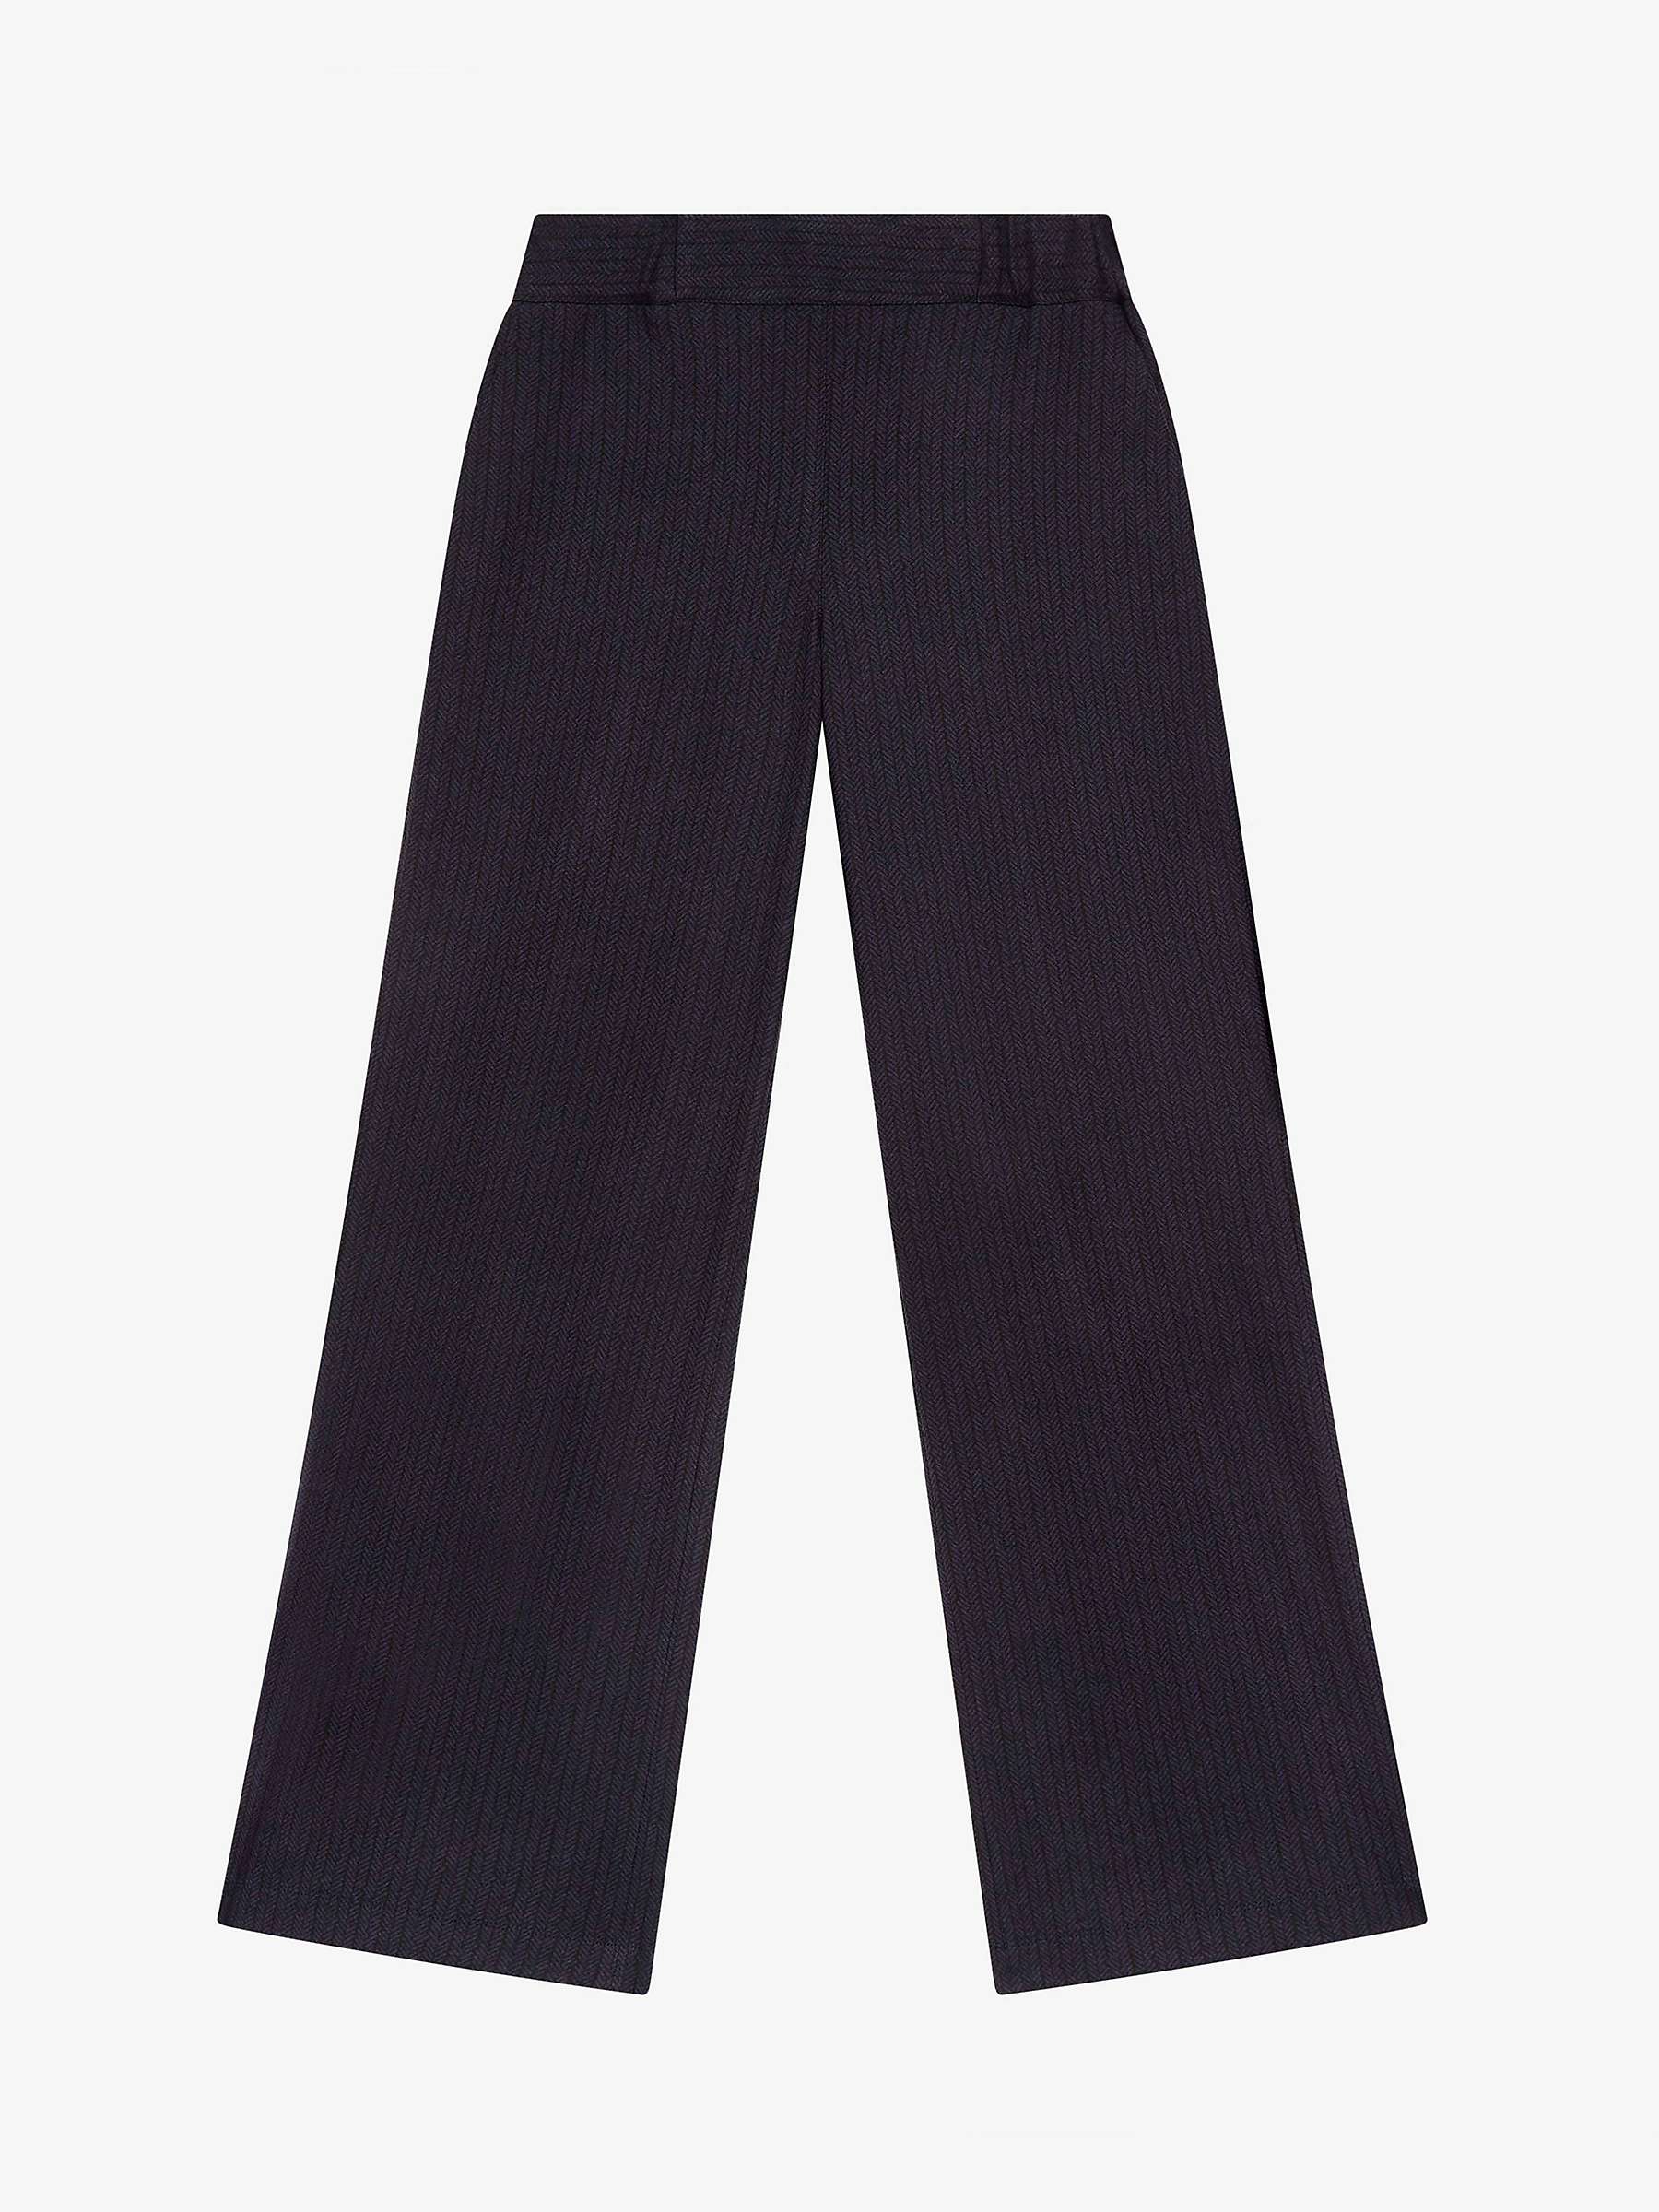 Buy Brora Pull On Textured Weave Trousers, Midnight Online at johnlewis.com